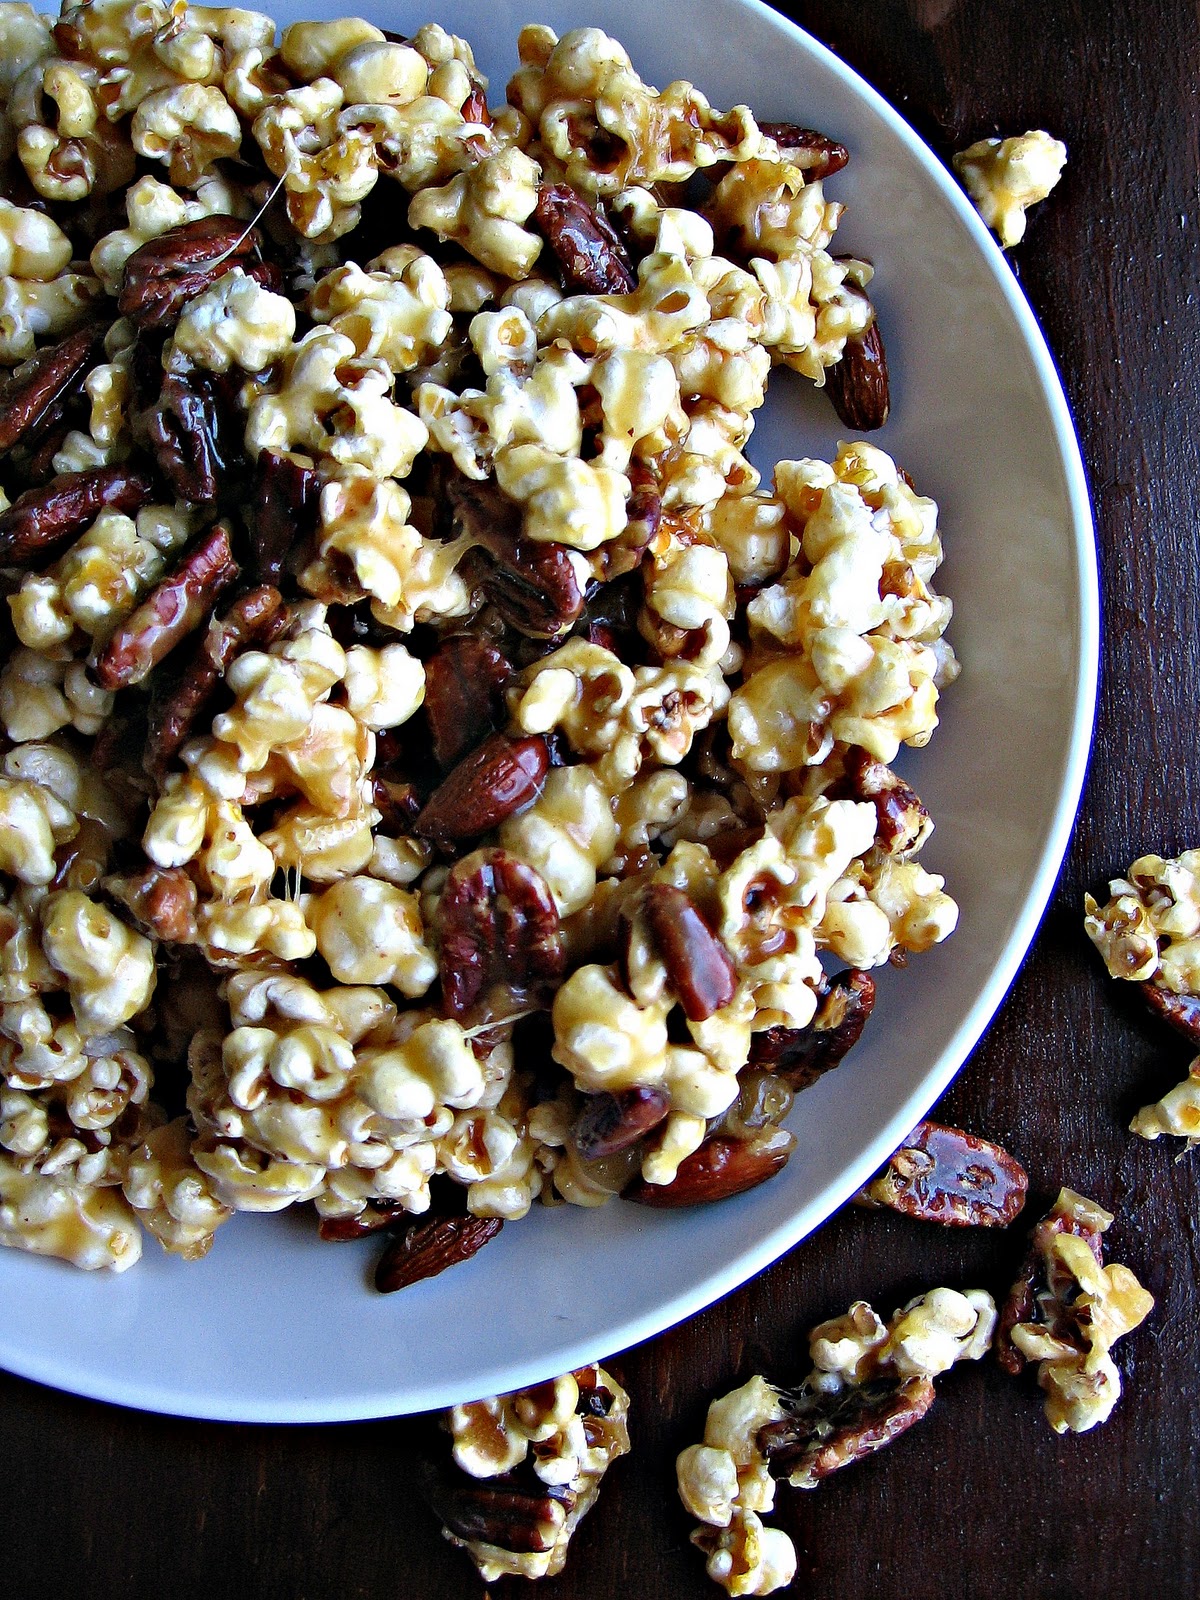 Sweetsugarbean For The Movies Caramel Popcorn With Roasted Nuts